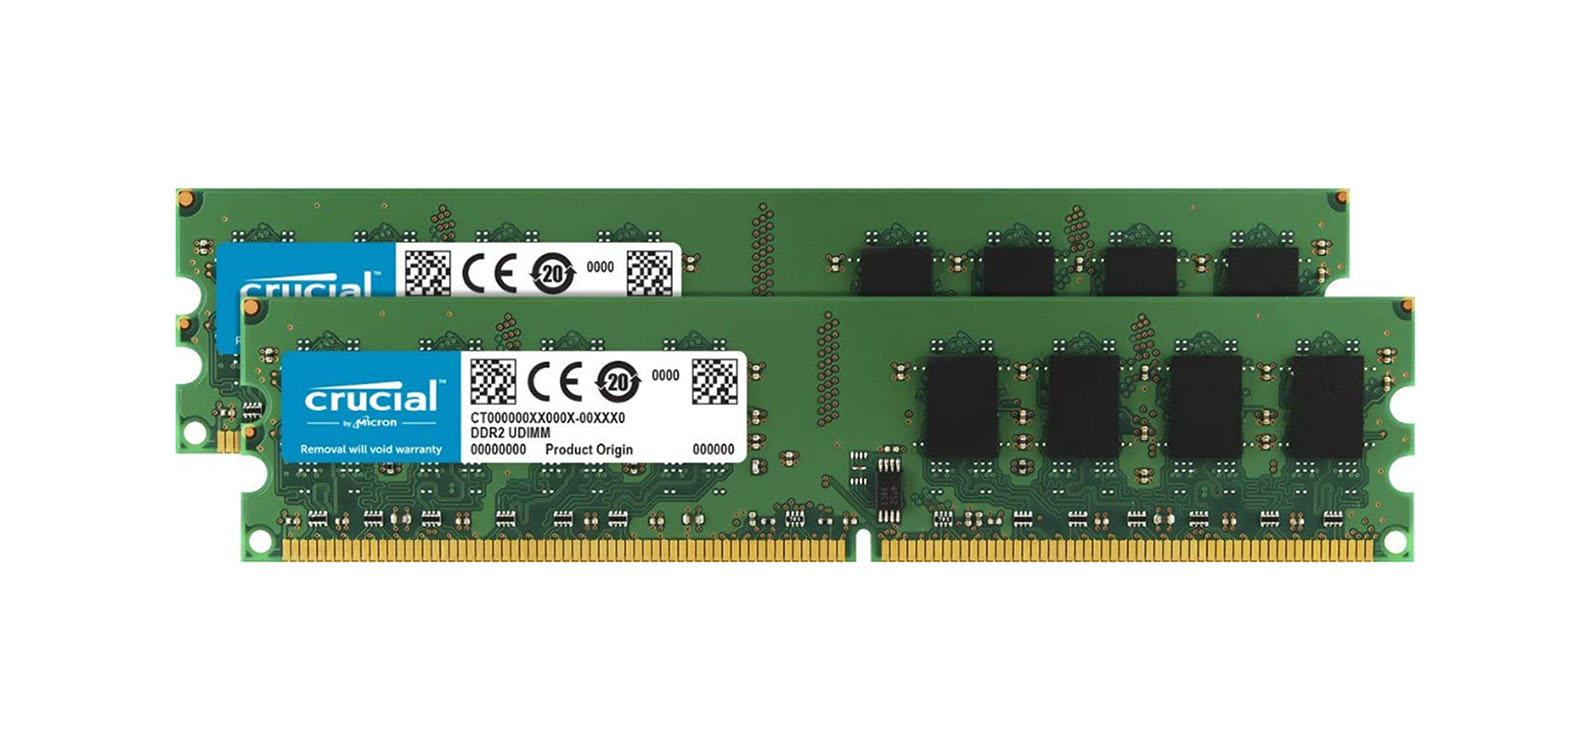 Crucial CT752382 8GB Kit (2 x 4GB) DDR2-667MHz PC2-5300 ECC Registered CL5 240-Pin DIMM Dual Rank Memory upgrade for Tyan Tempest i5100X S5375